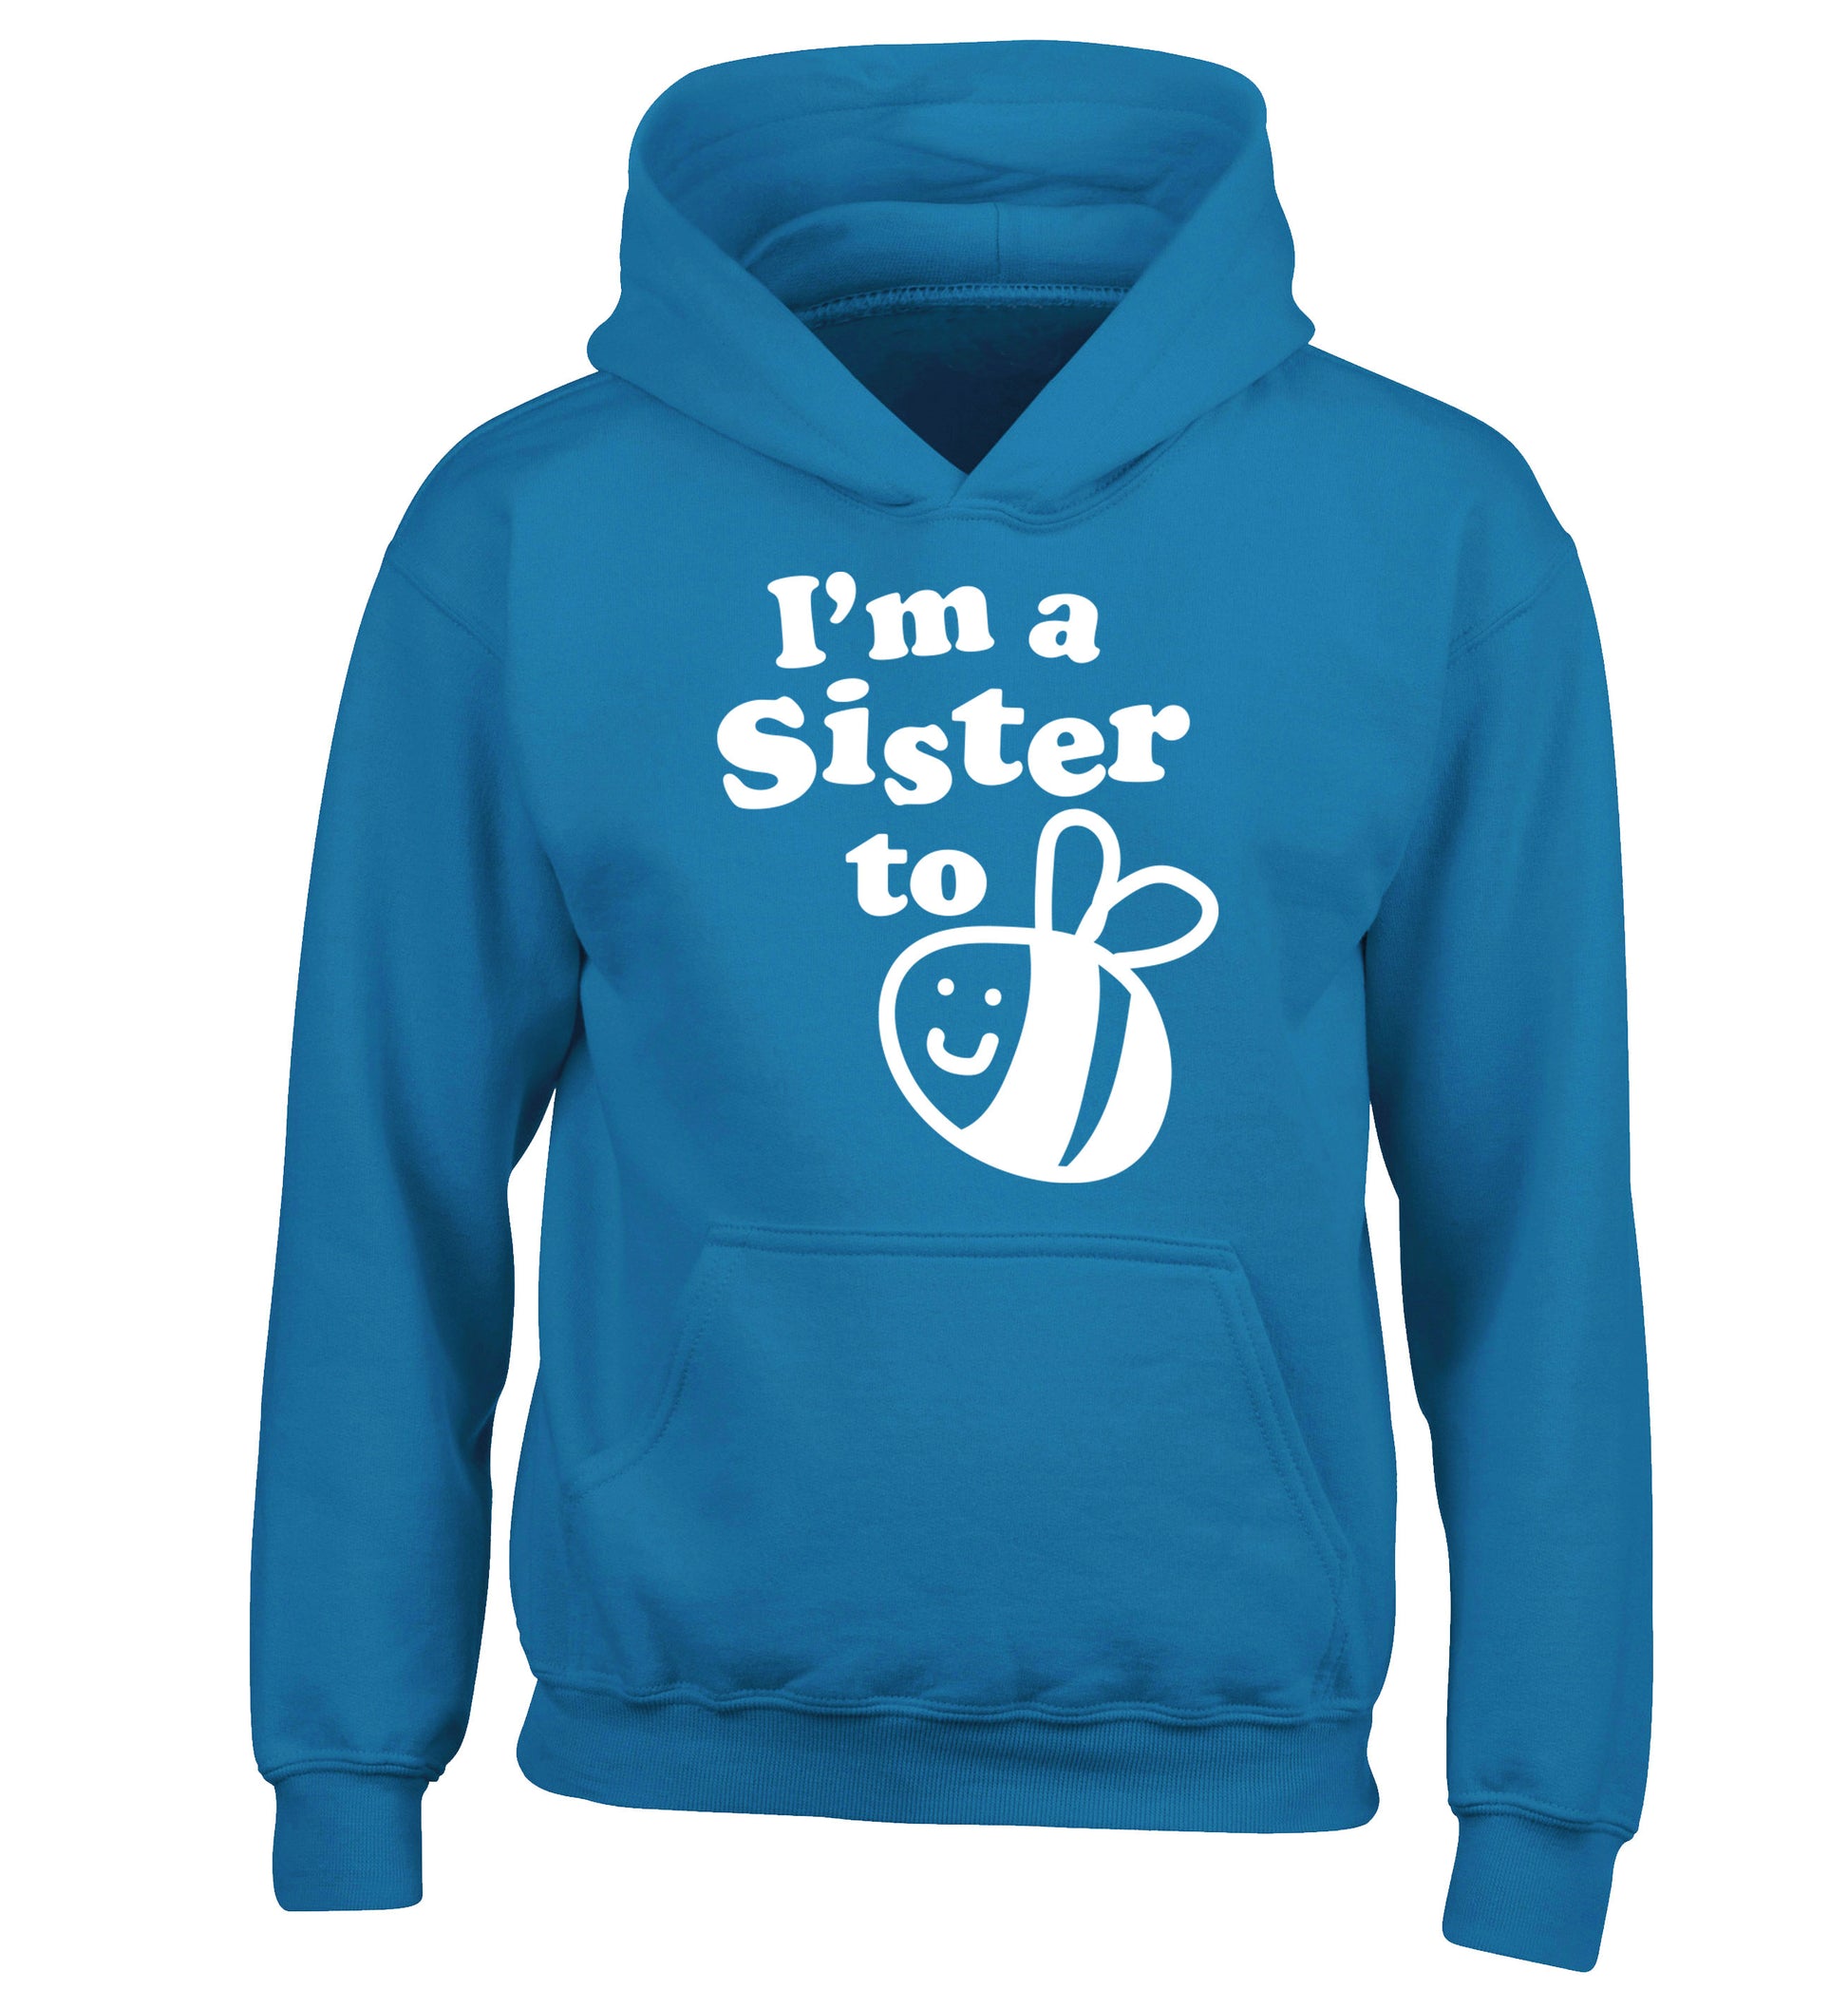 I'm a sister to be children's blue hoodie 12-14 Years